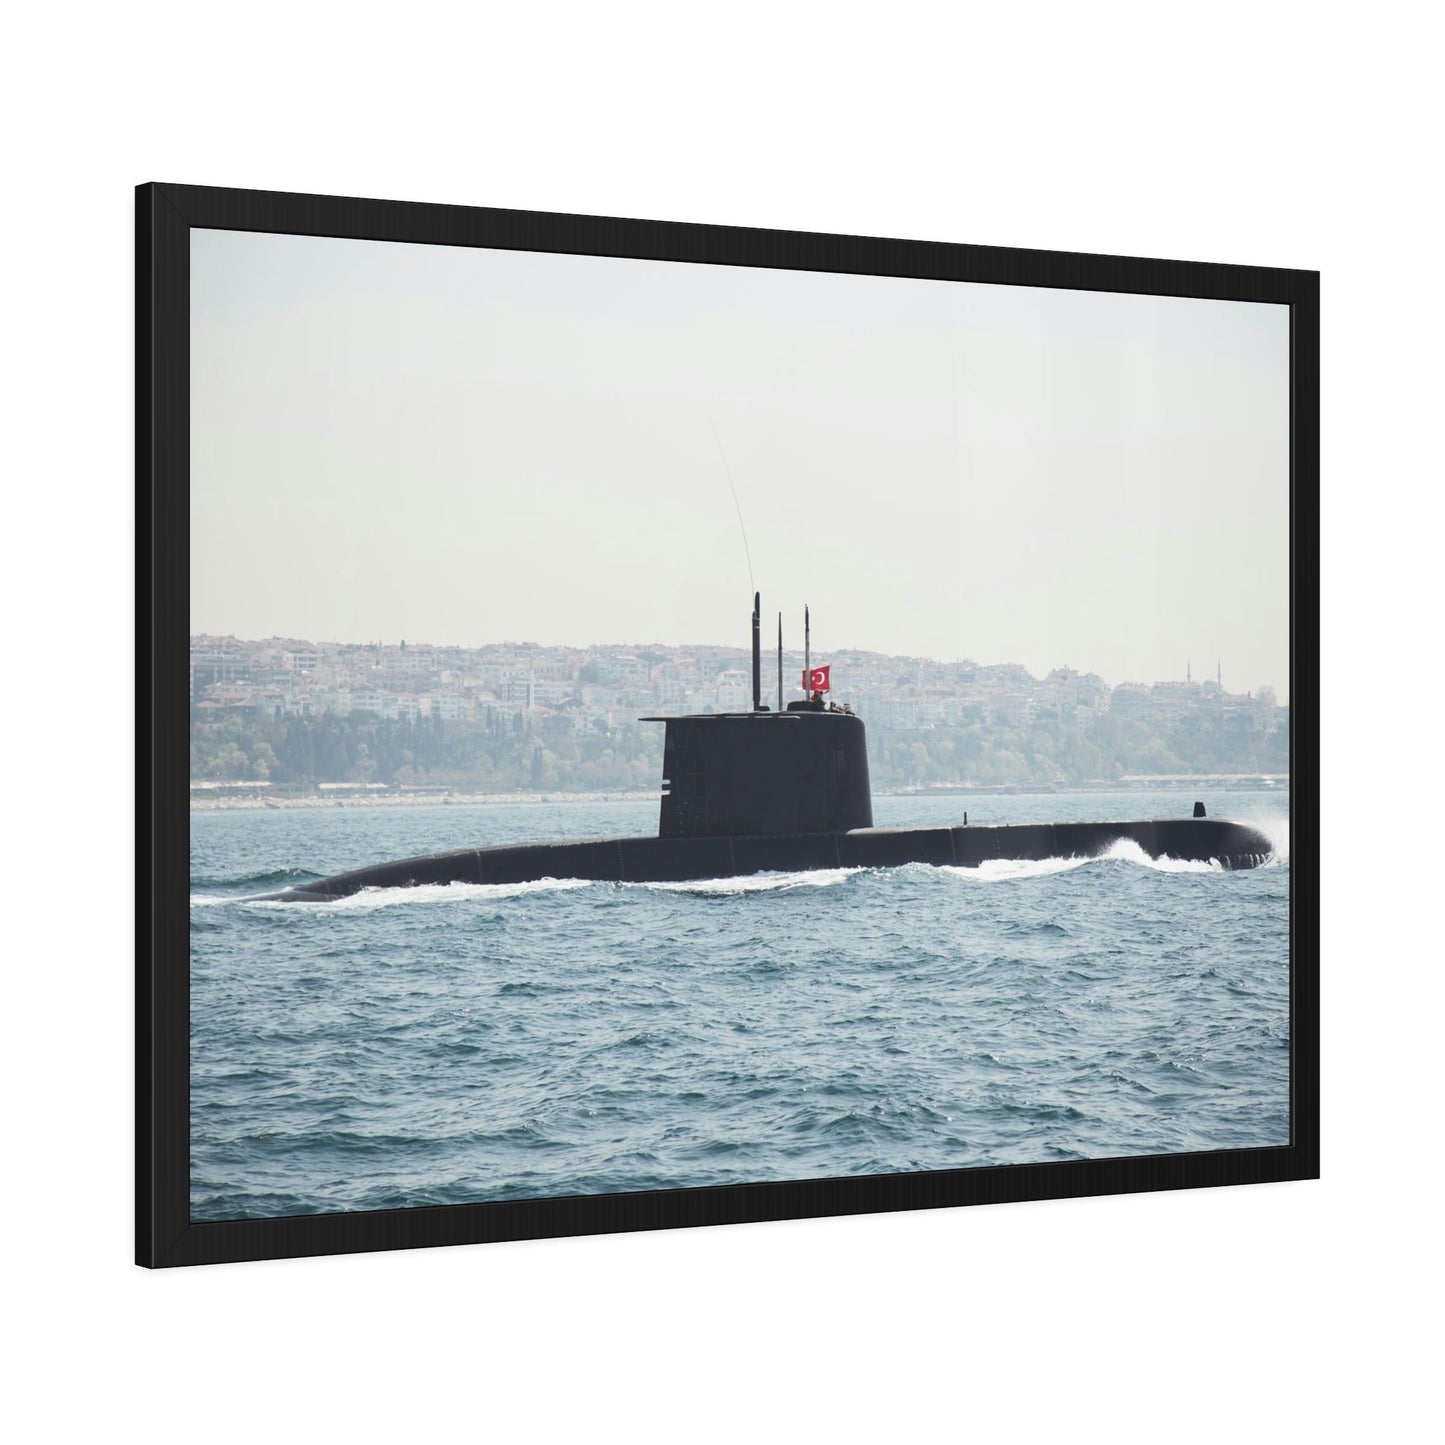 Submarines and the Blue Horizon: A Vision of the Ocean's Majesty